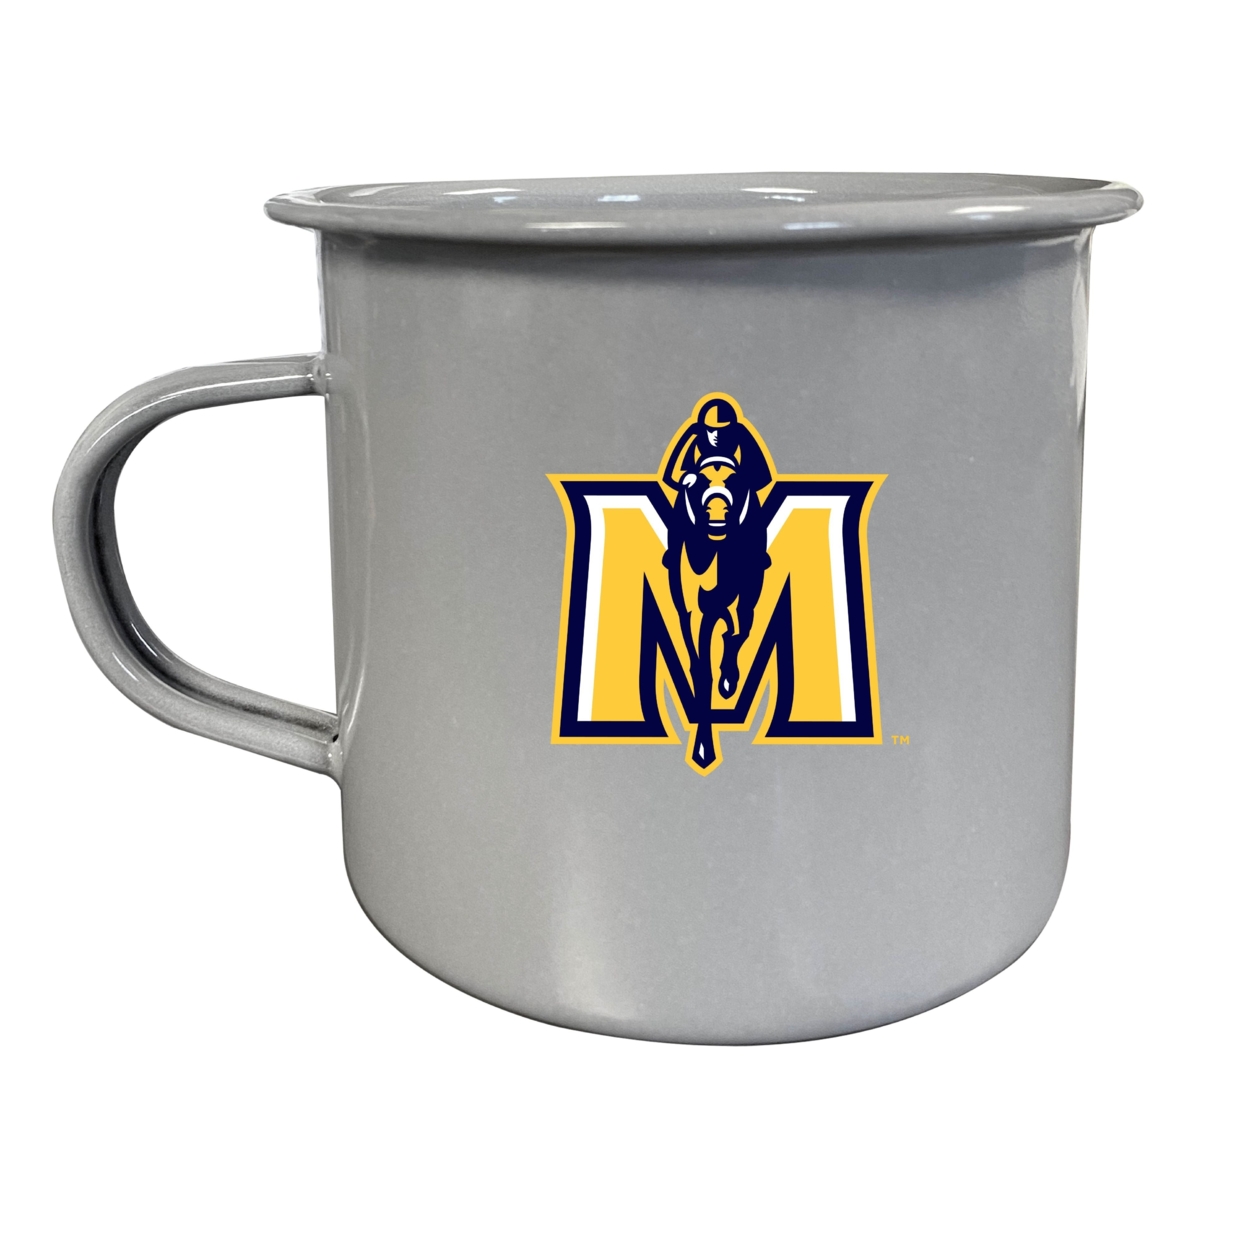 Murray State University Tin Camper Coffee Mug - Choose Your Color - Gray